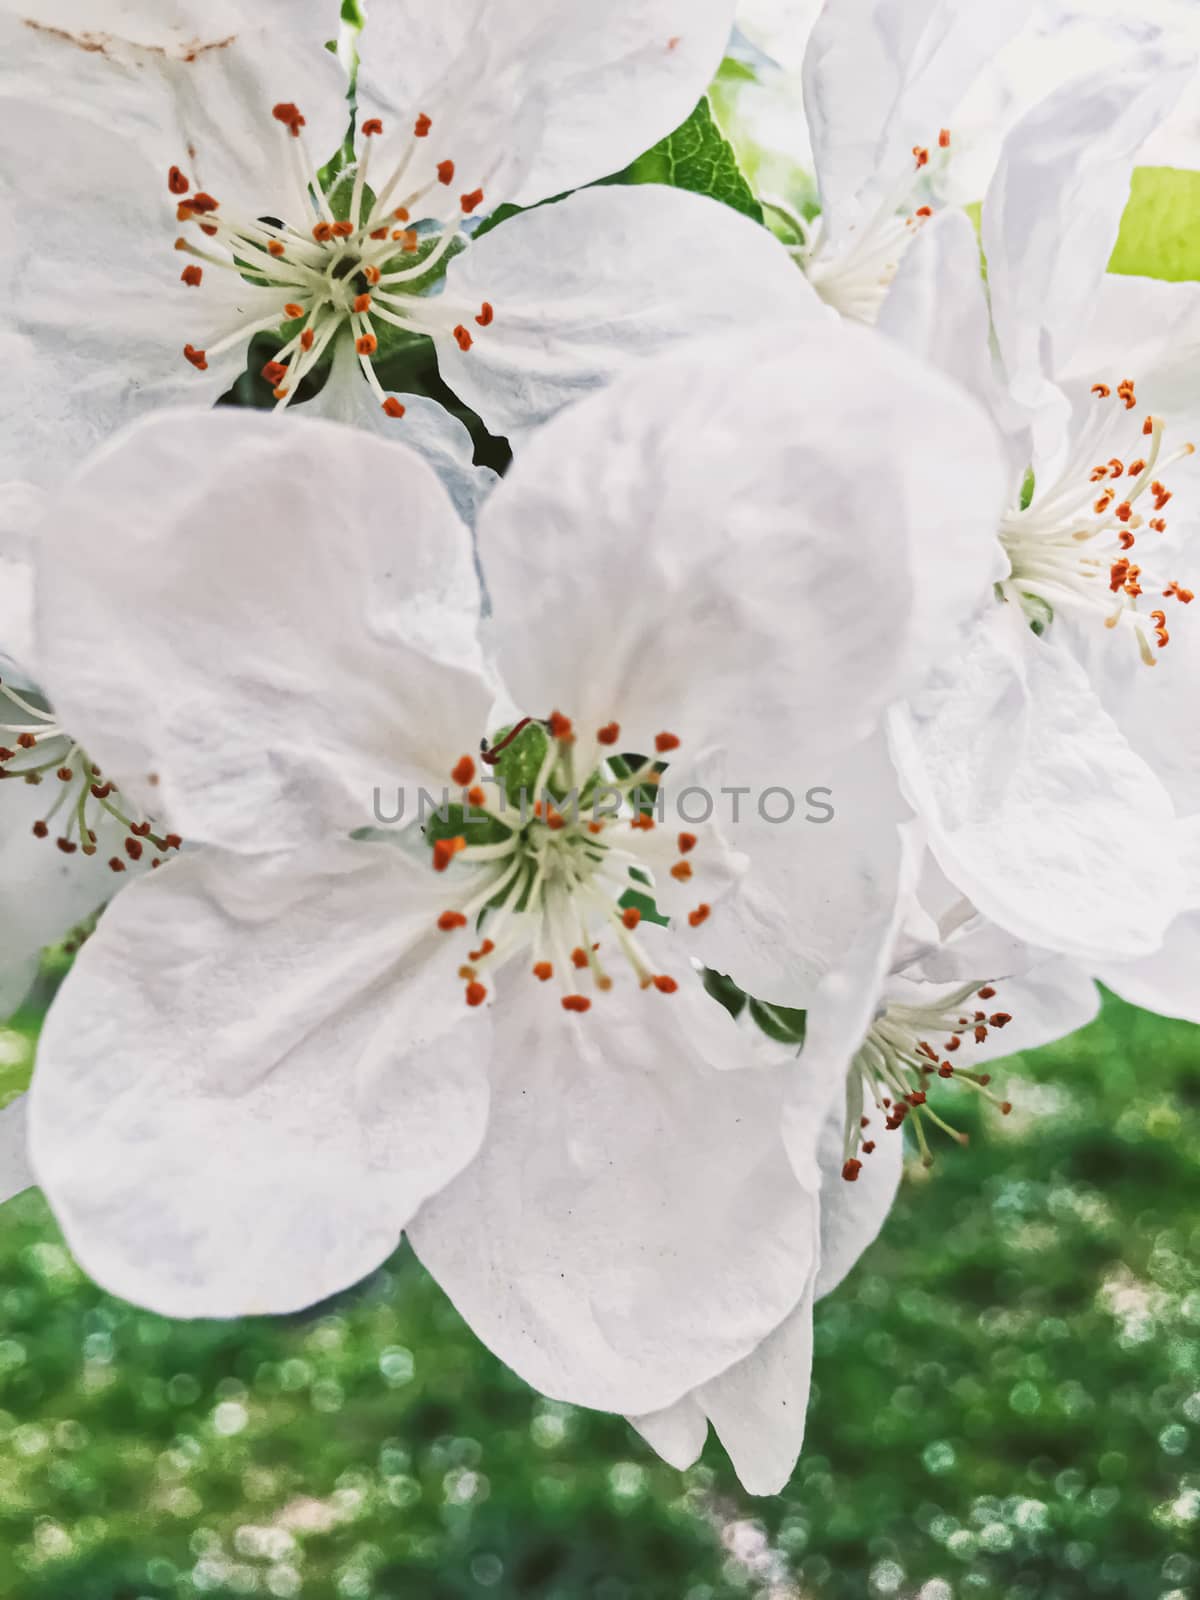 Blooming apple tree flowers in spring garden as beautiful nature landscape, plantation and agriculture scenery